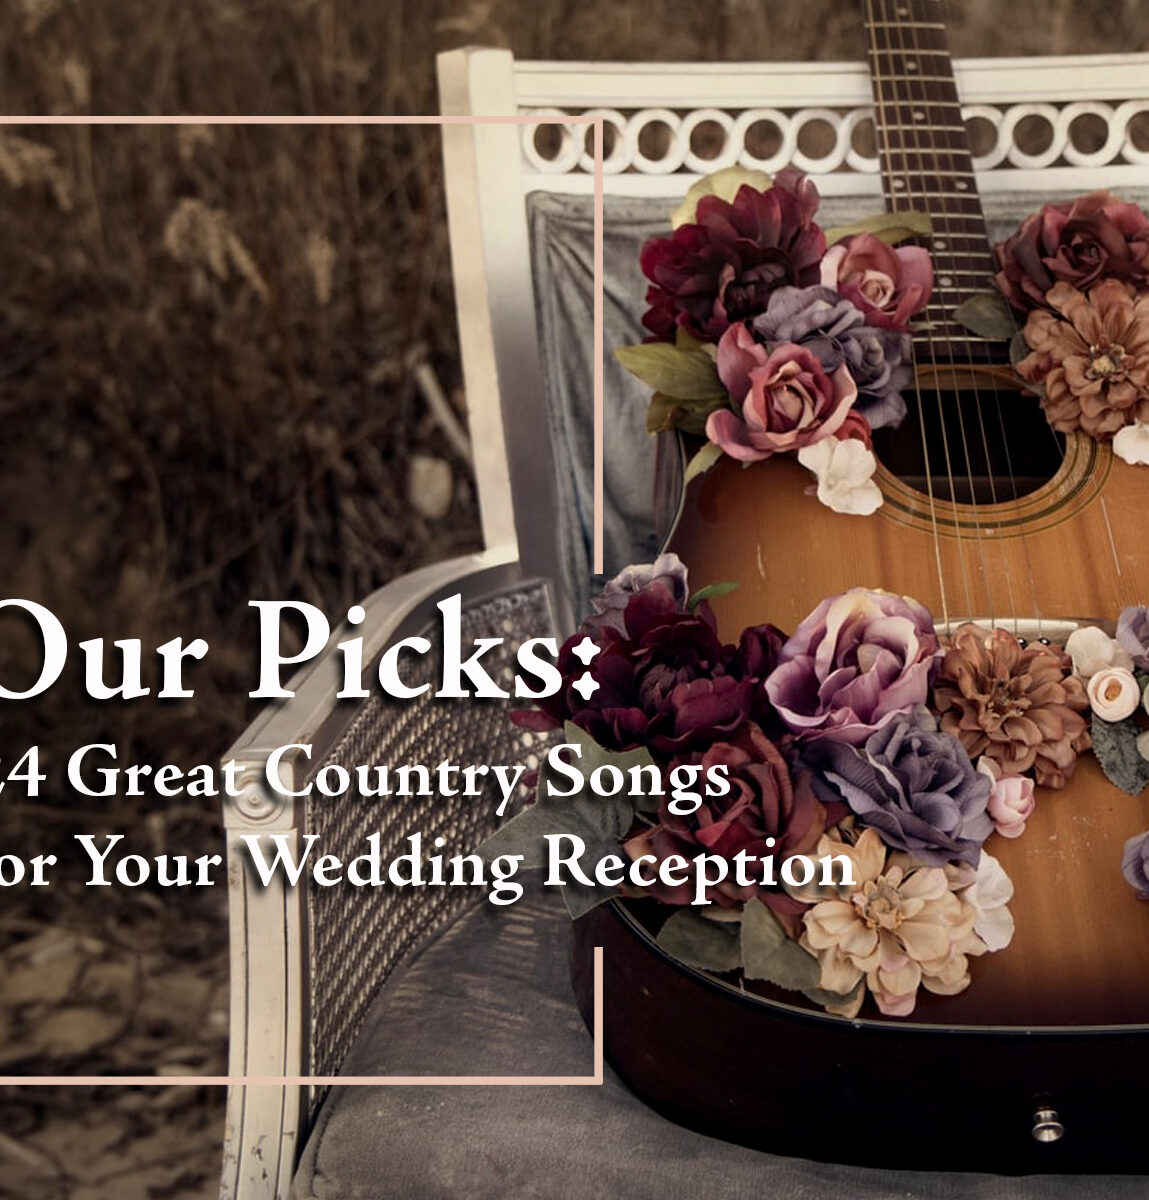 24 Great Country Songs for Your Wedding Reception